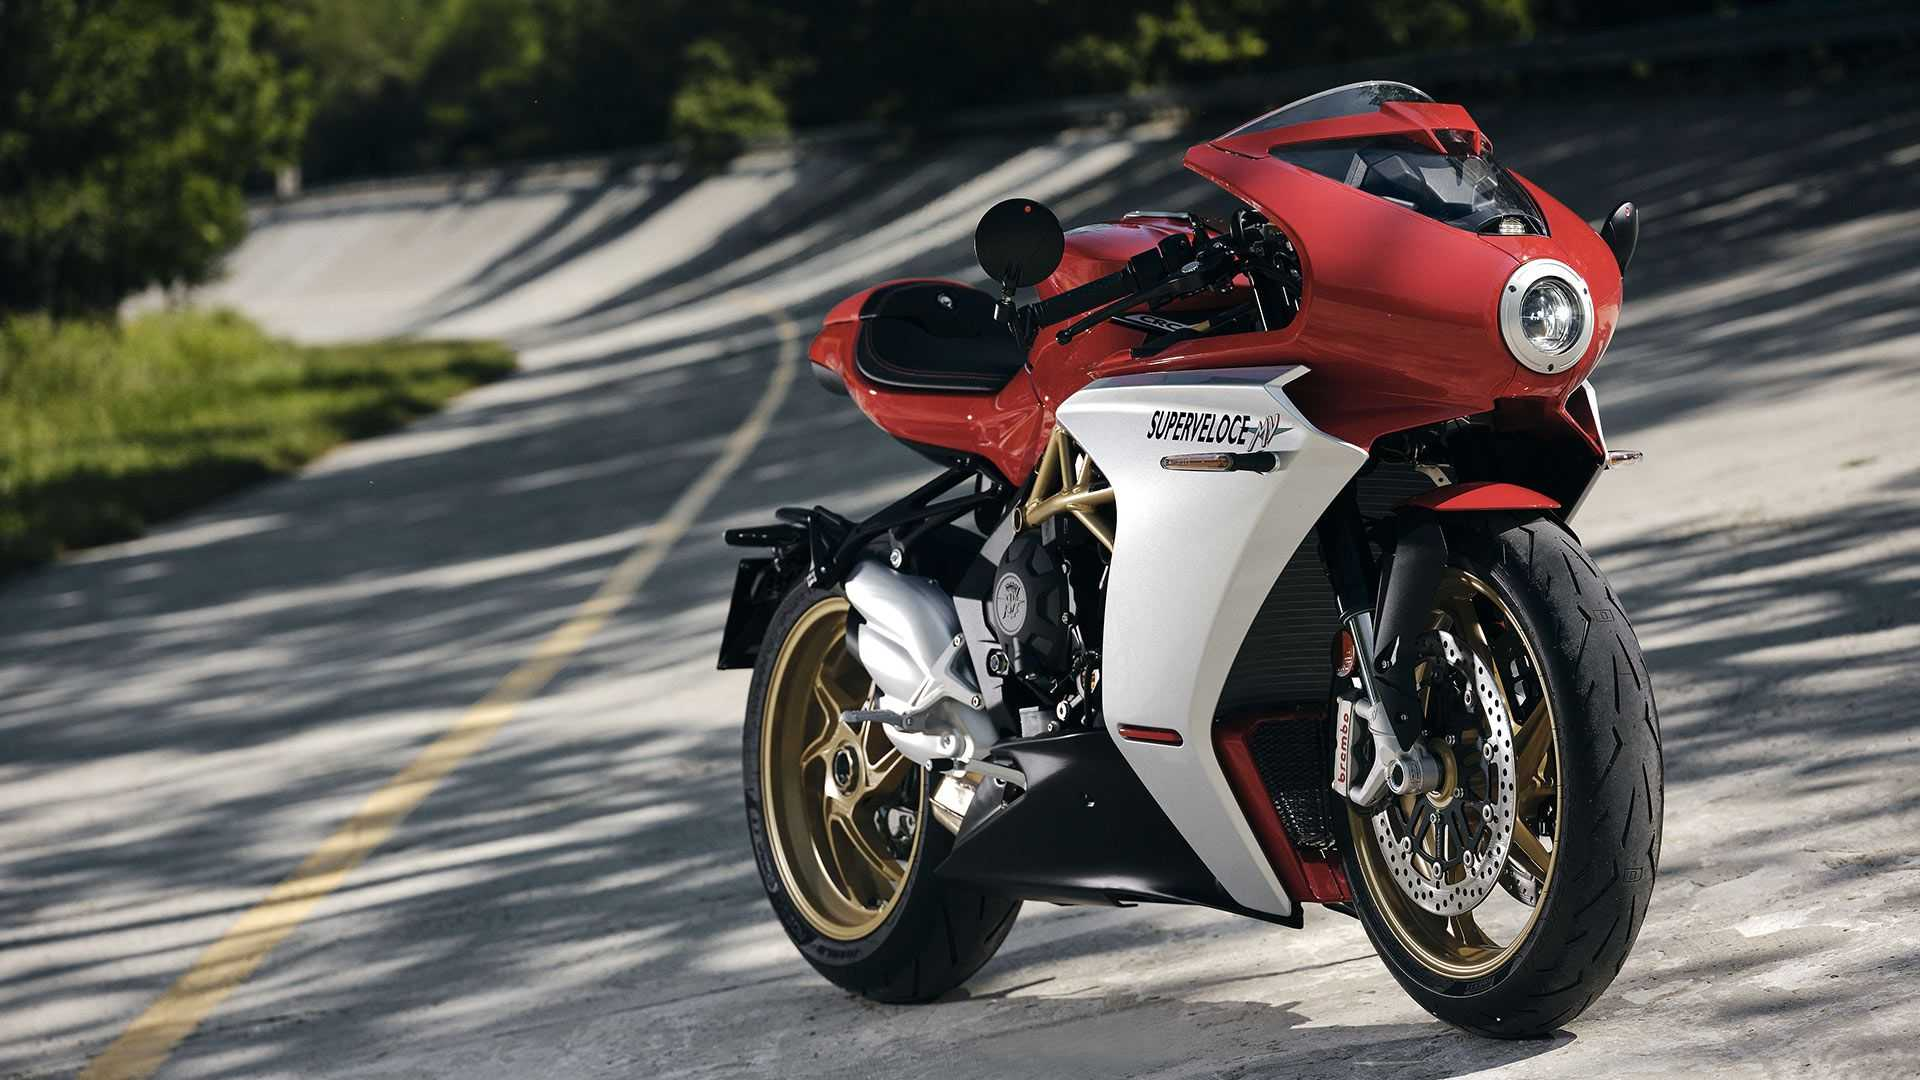 Coolest MV Agusta Motorcycles Ever Made, Ranked